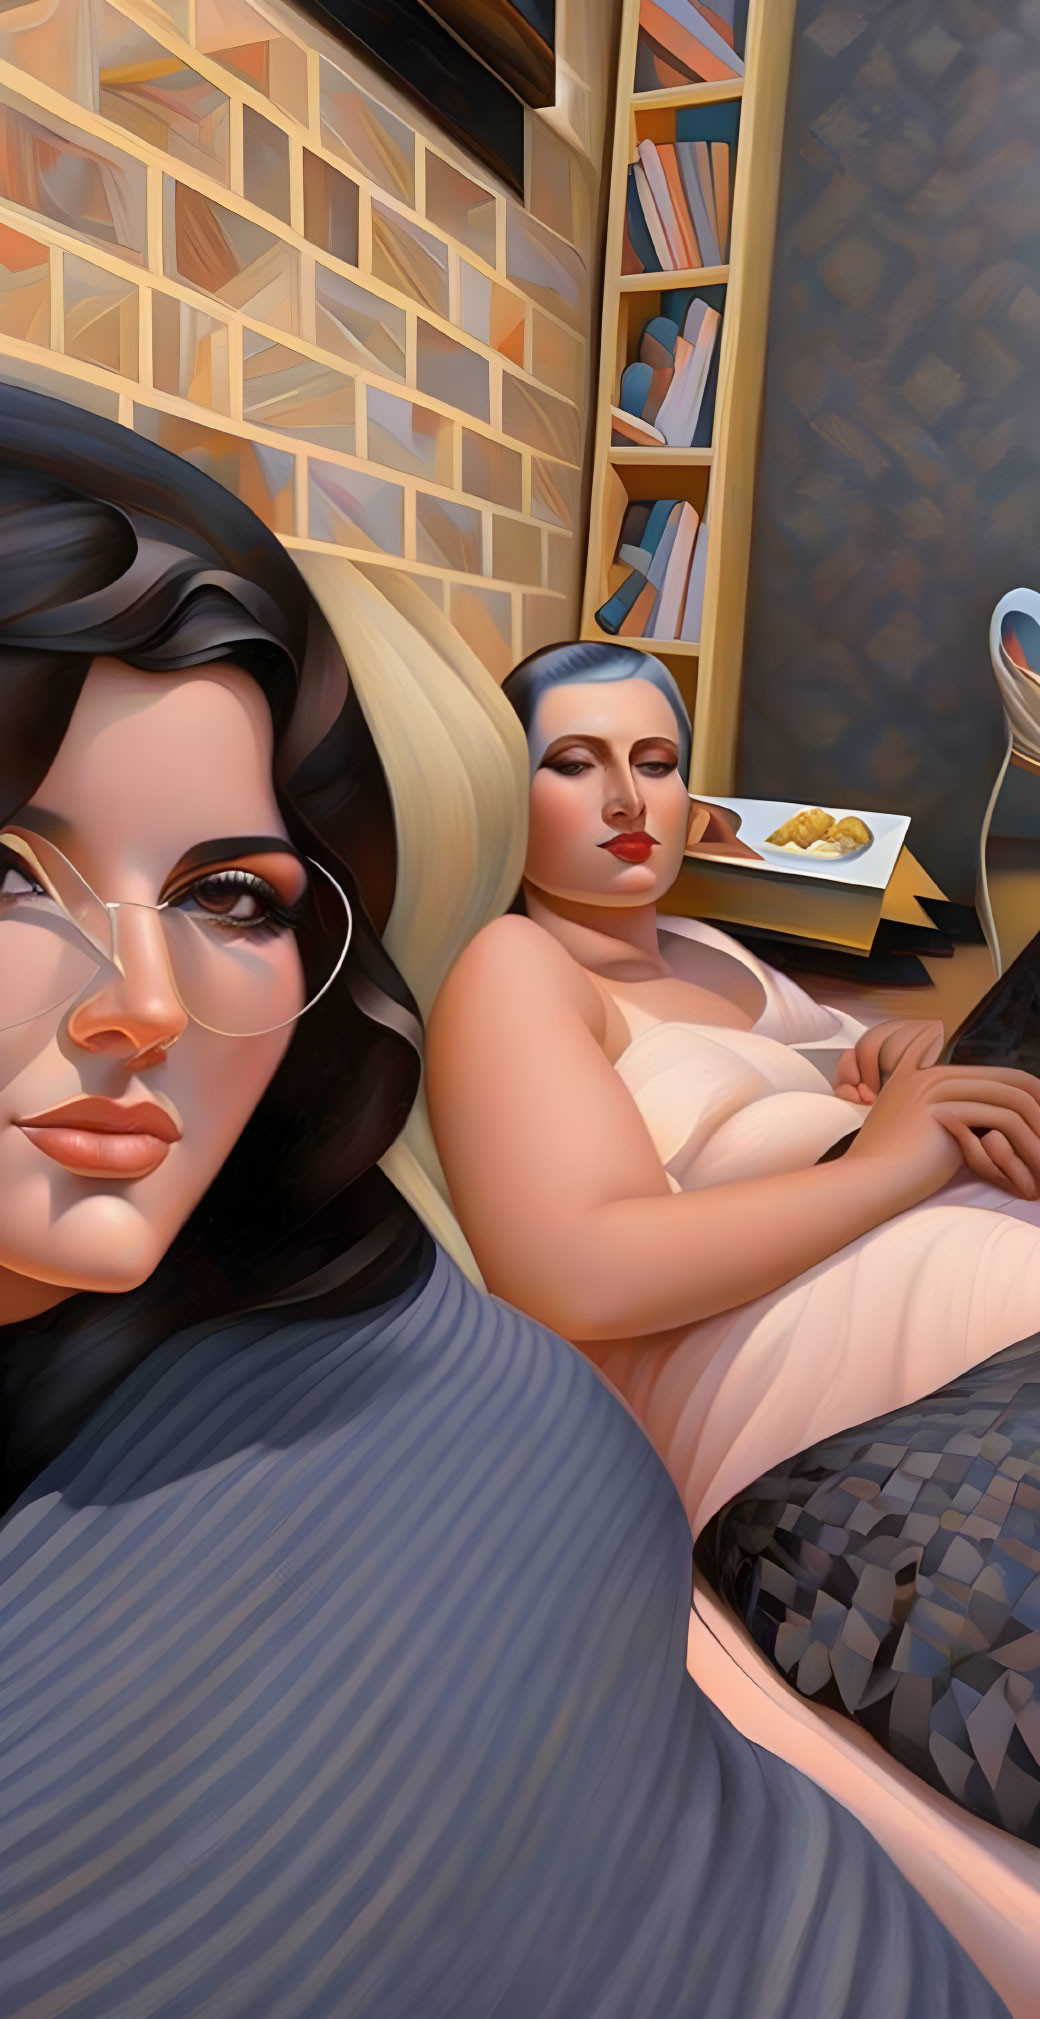 Stylized women lounging with glasses, books, and beverage